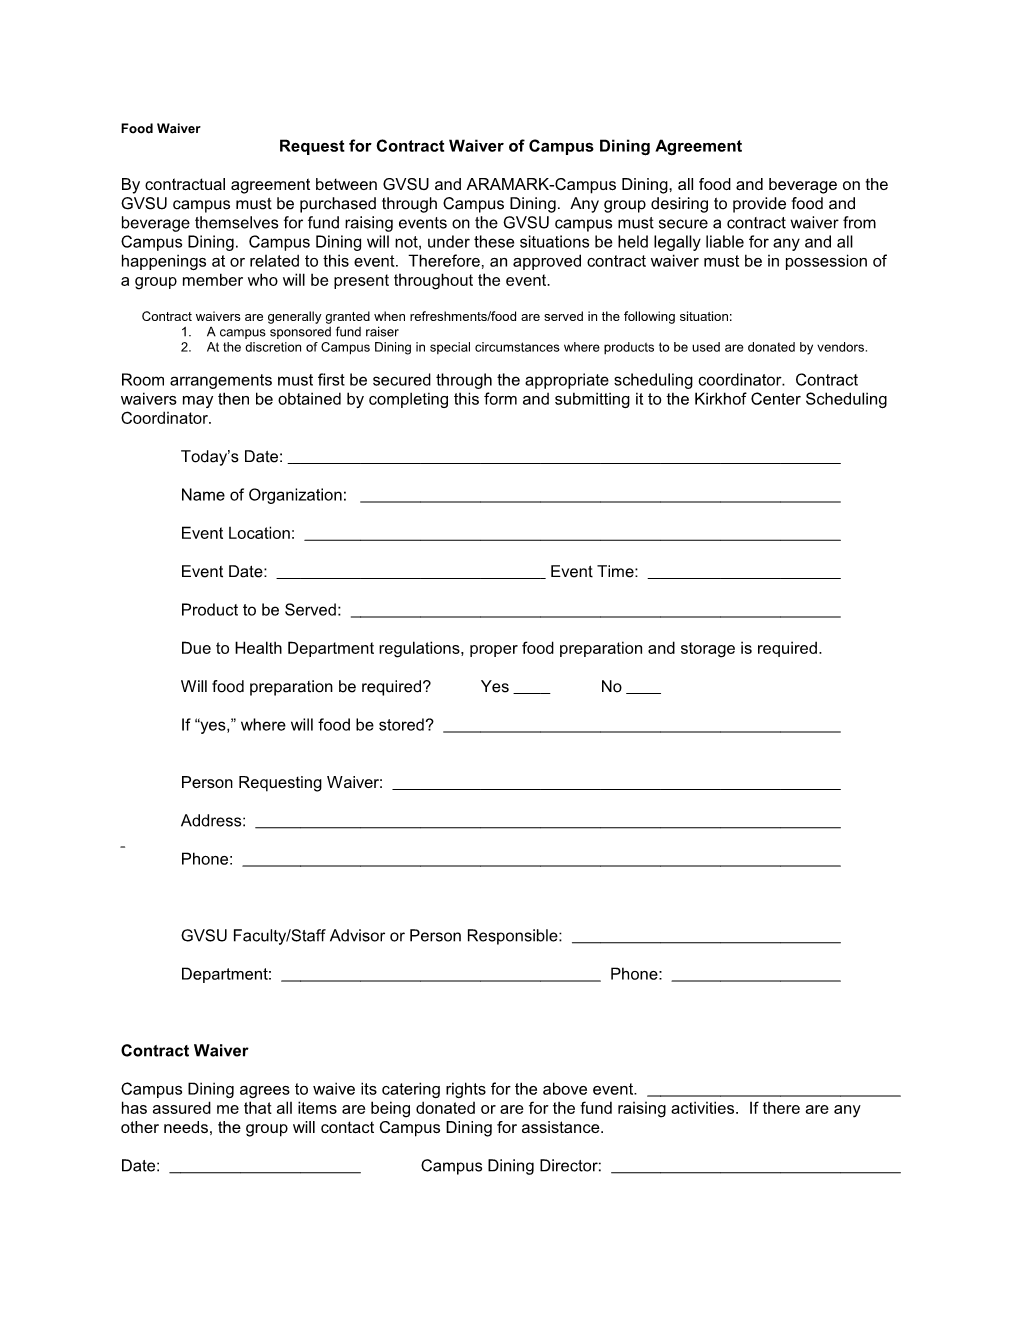 Request for Contract Waiver of Campus Dining Agreement